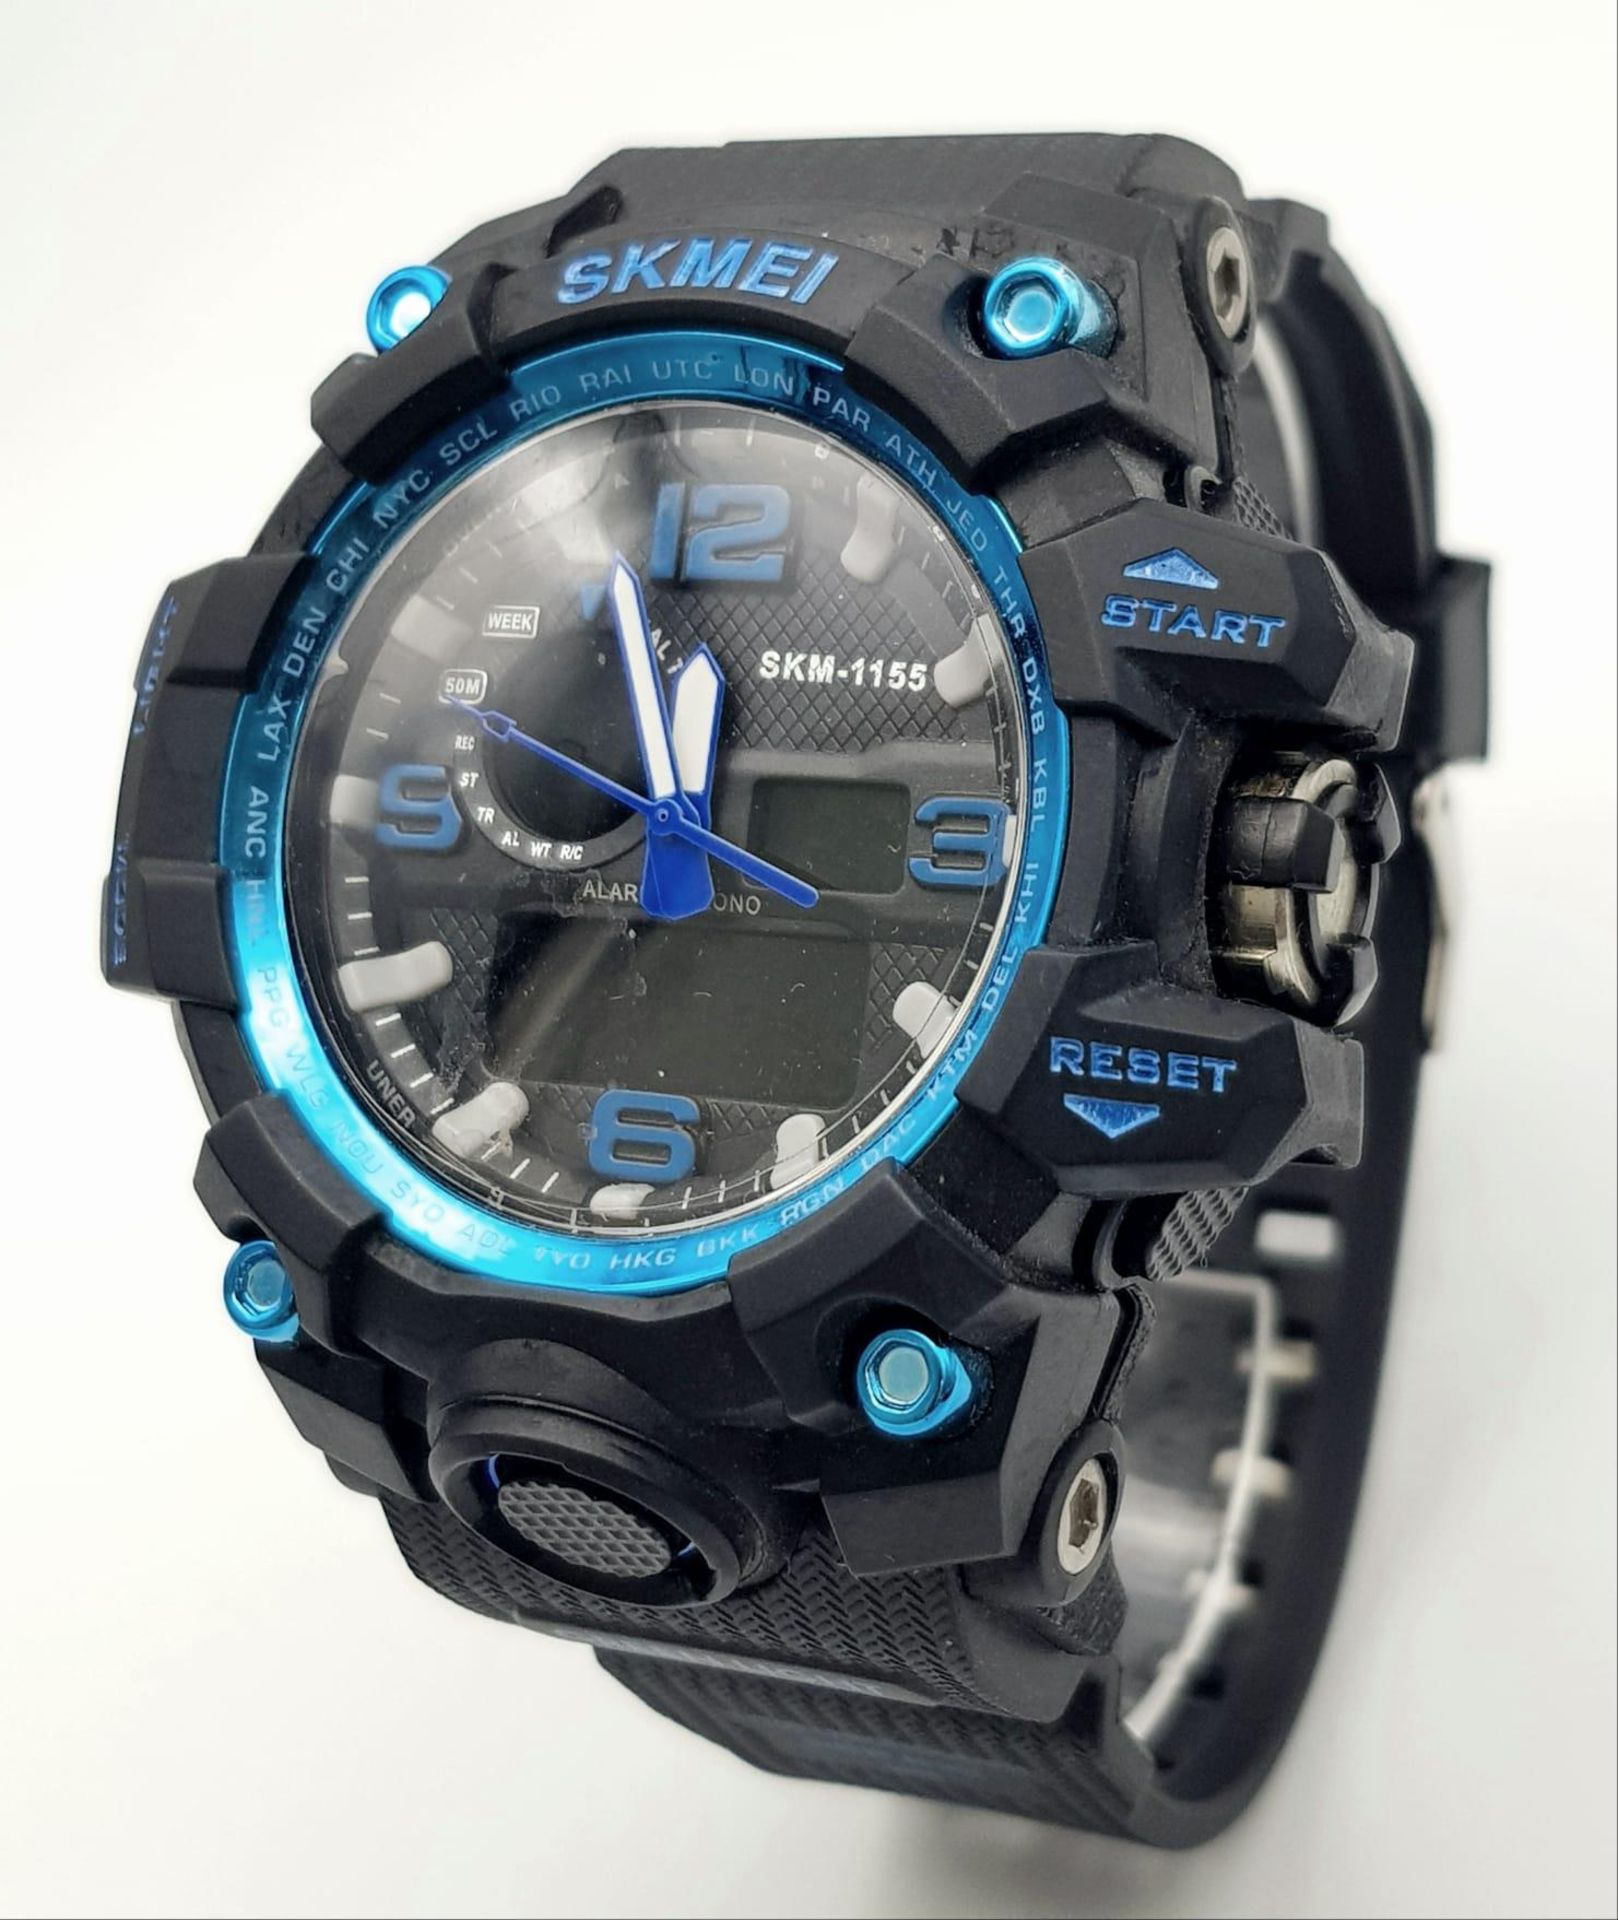 A Digital and Analogue Sports Watch by Skmei. Comes with Boxed and with Tags. Full Working Order.